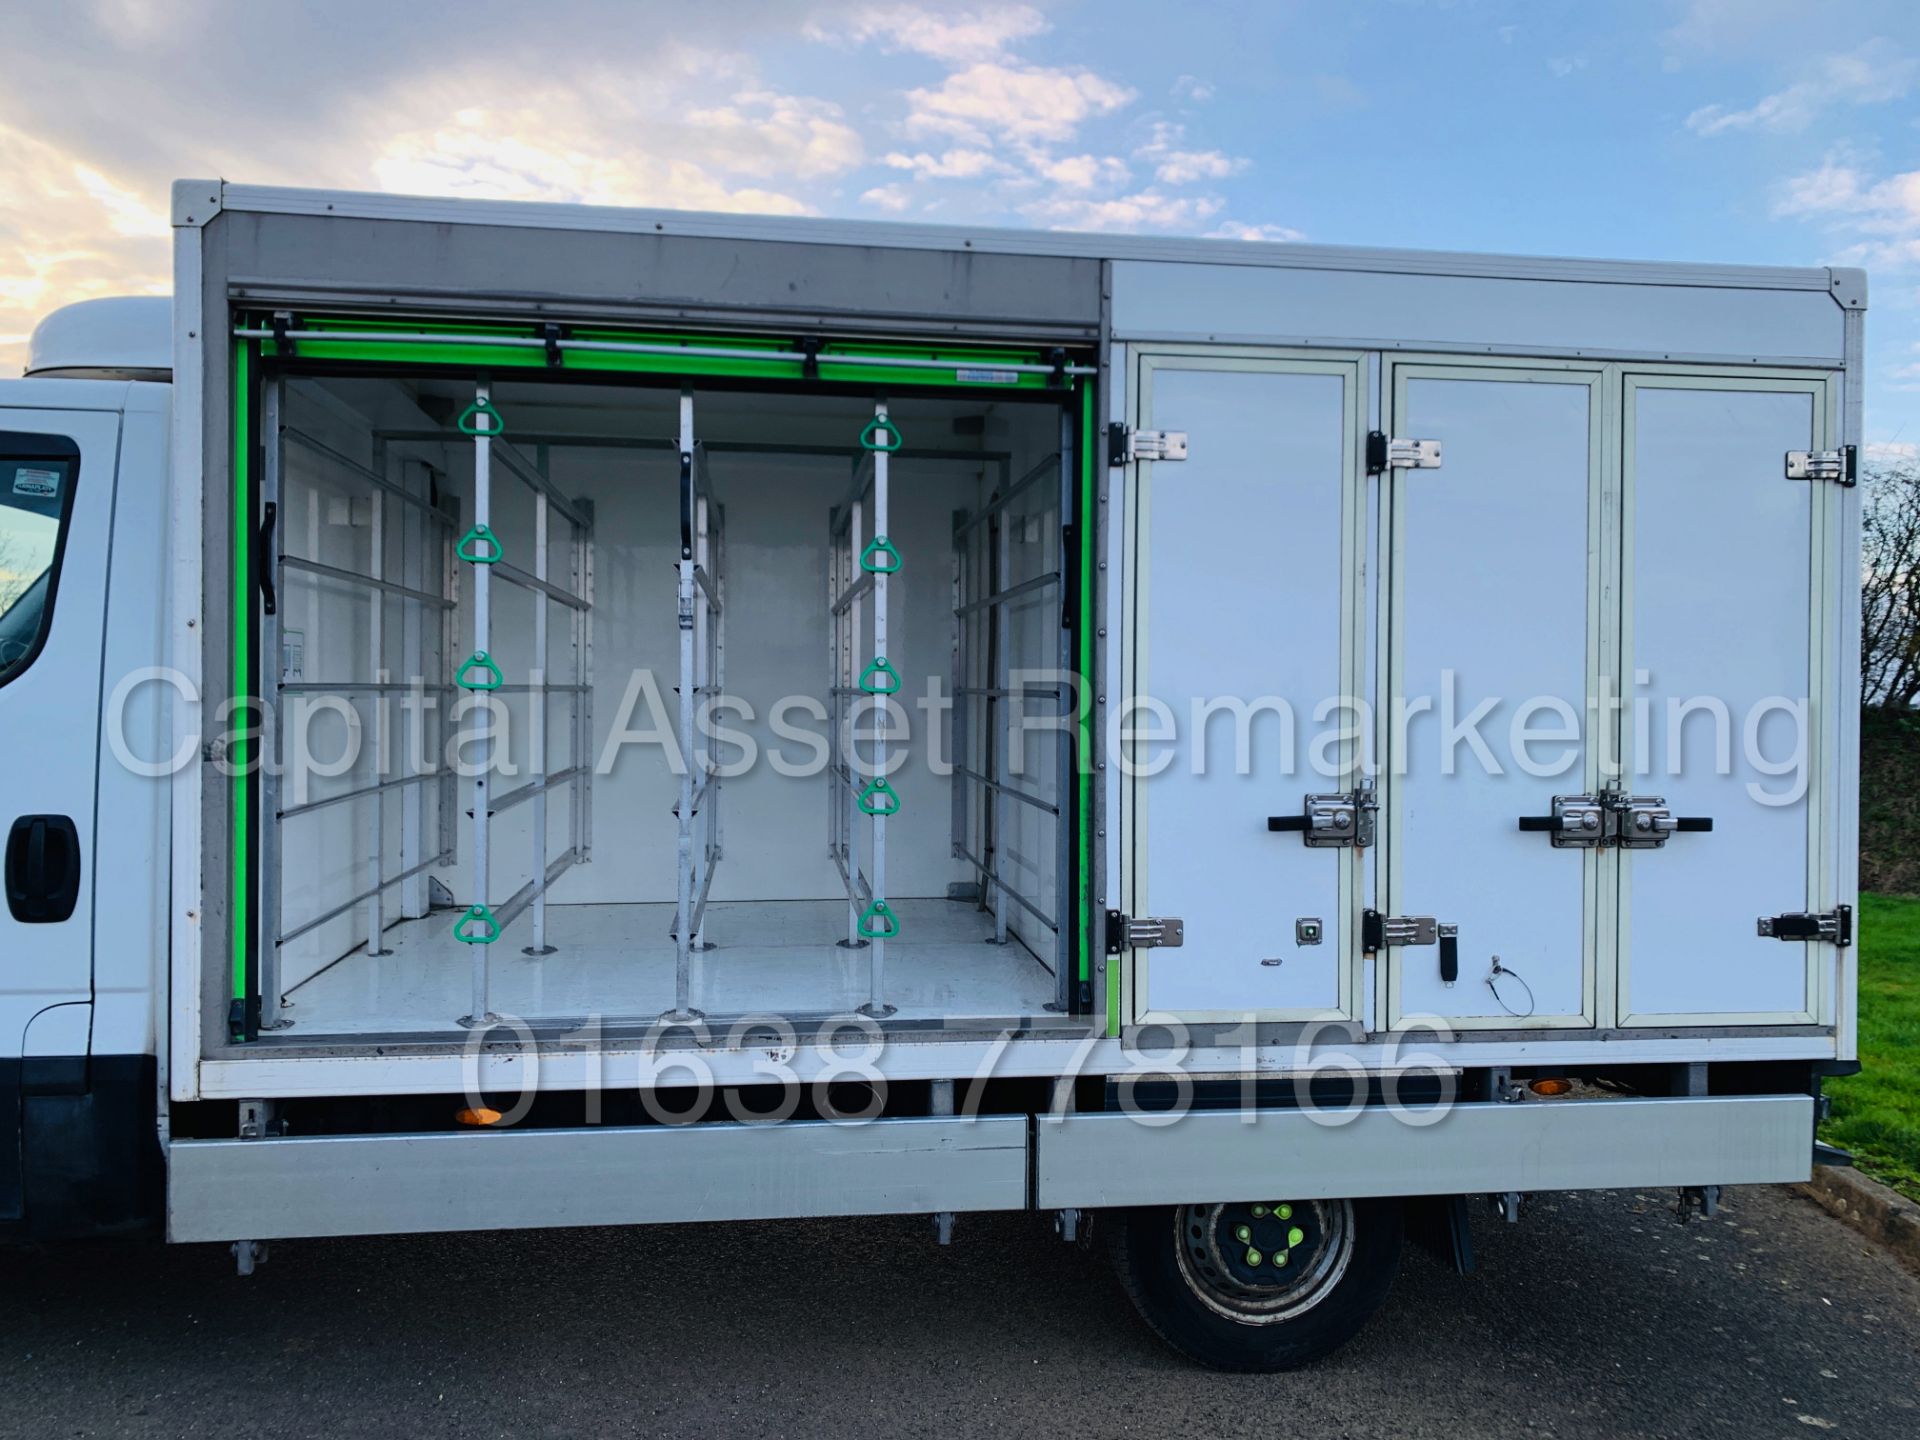 (On Sale) IVECO DAILY 35S11 *LWB - REFRIGERATED BOX* (2015 - NEW MODEL) '2.3 DIESEL - 8 SPEED AUTO' - Image 21 of 39